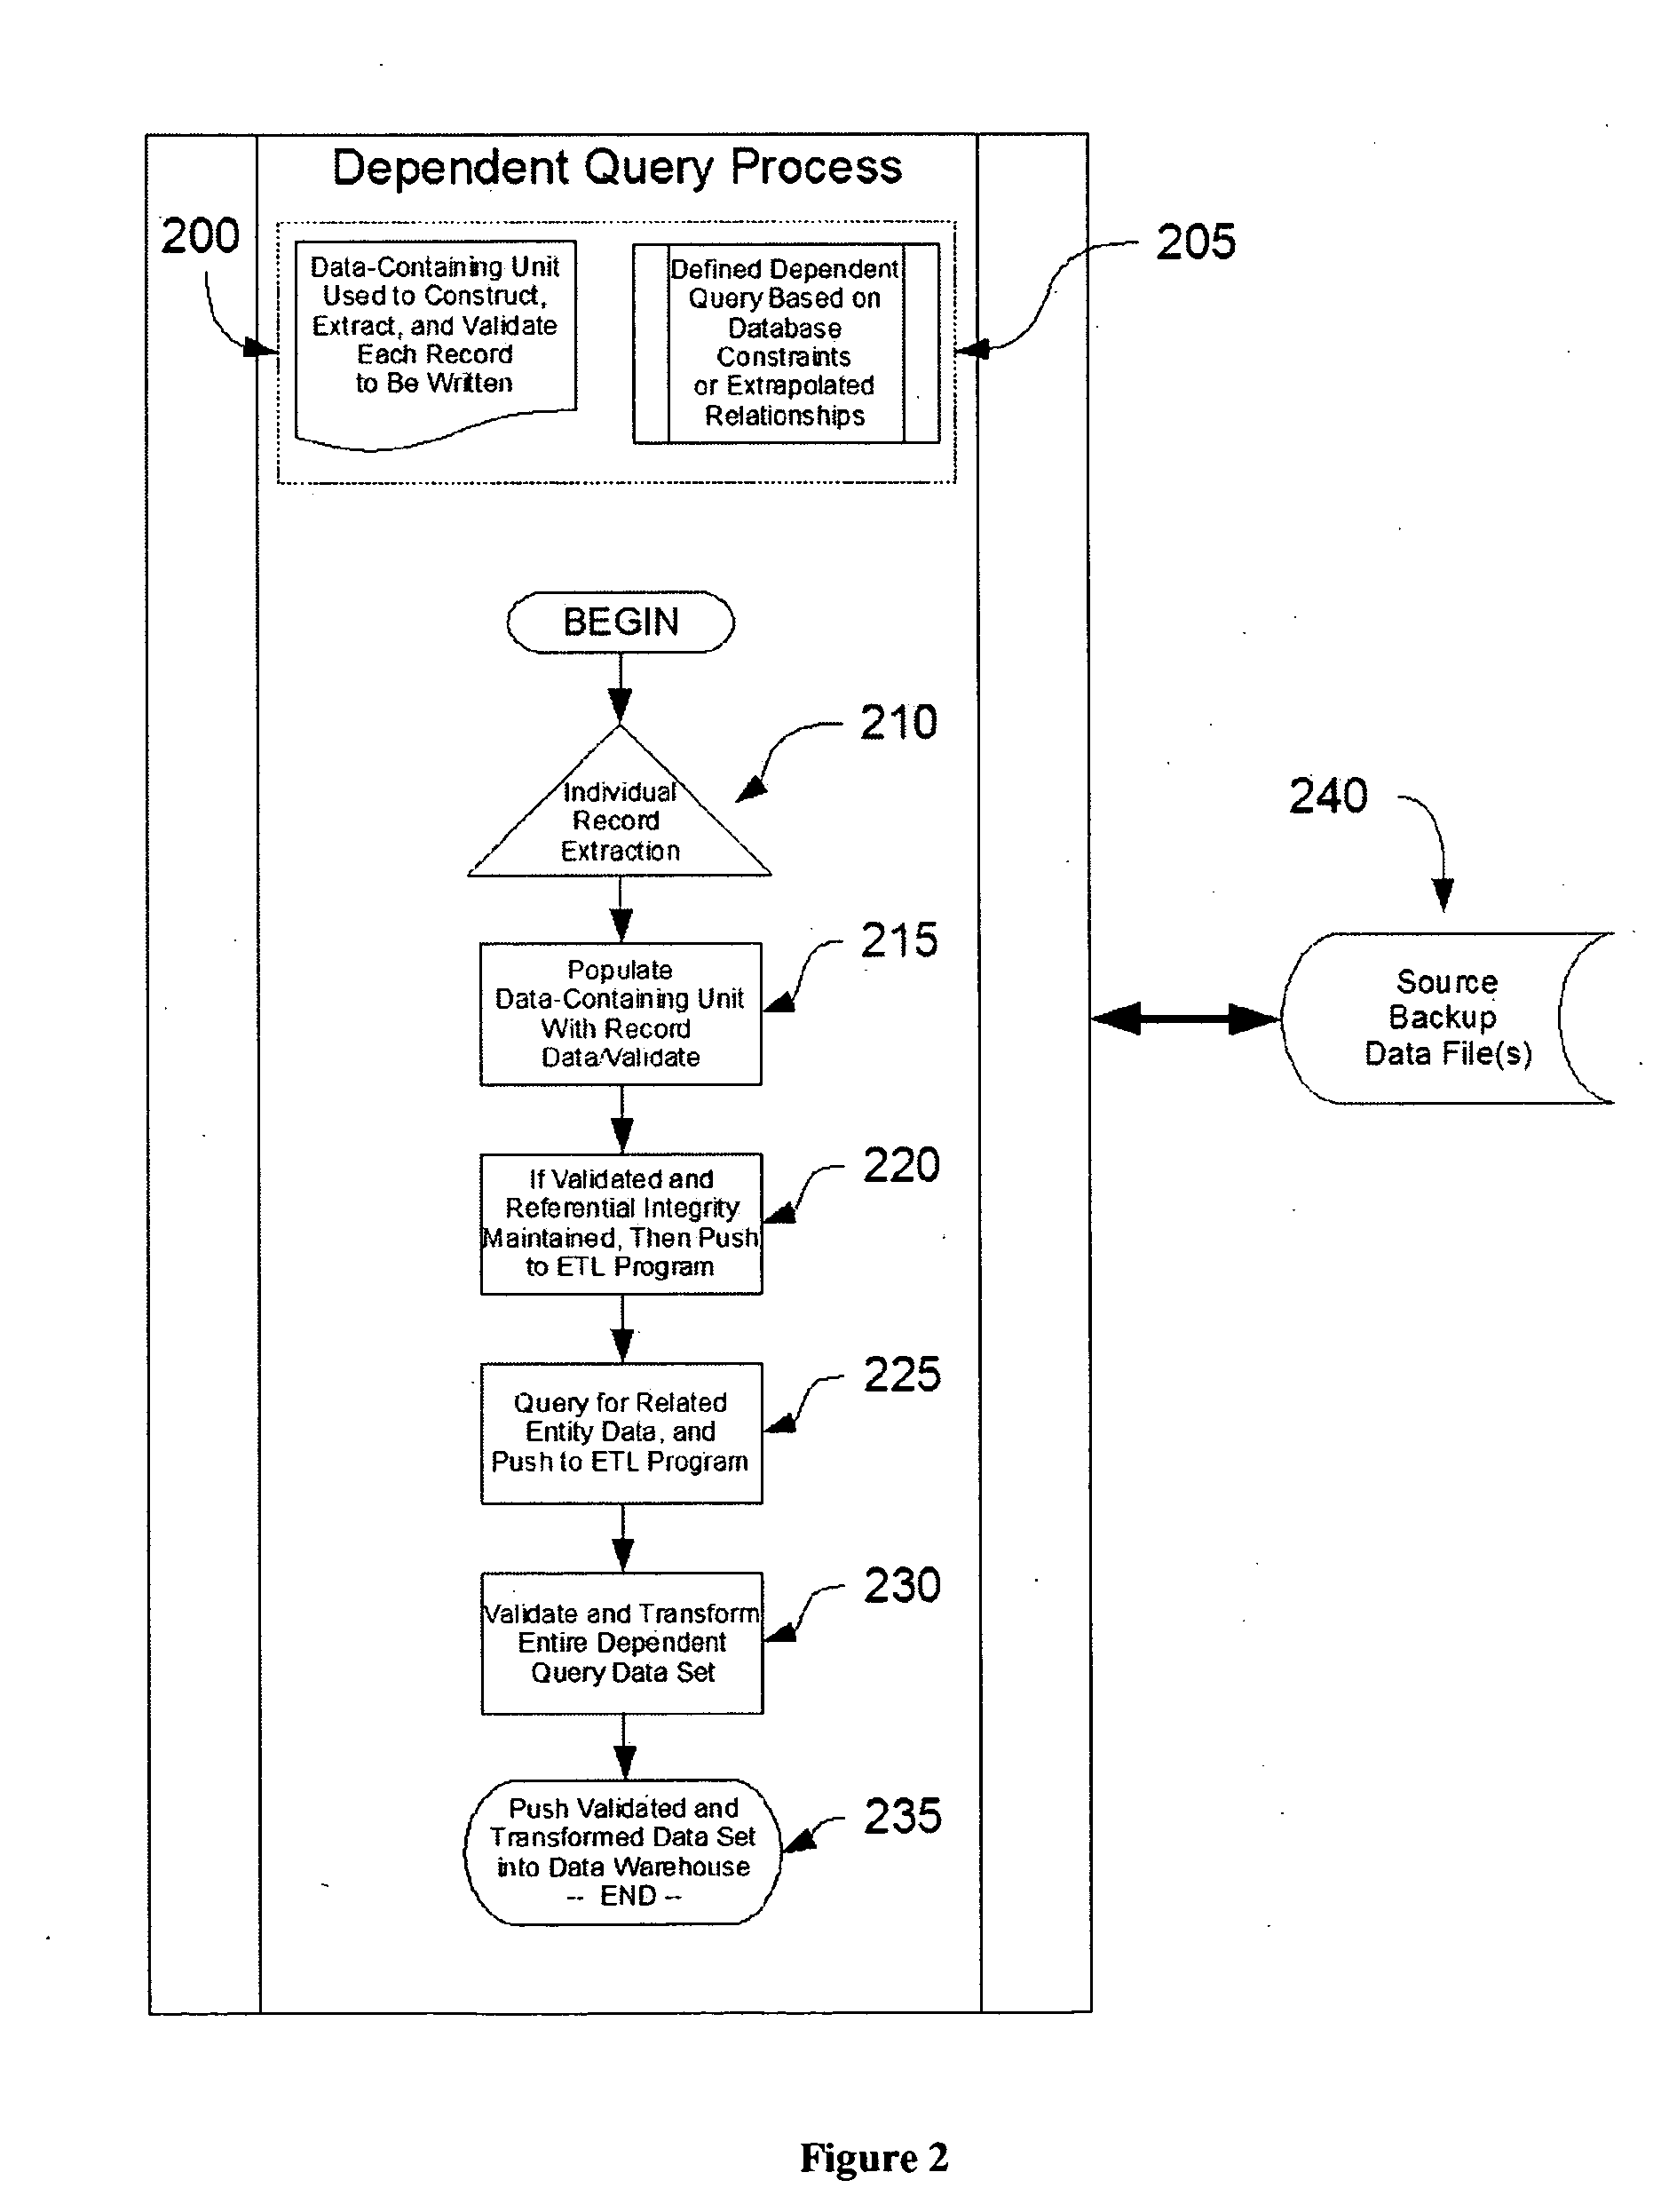 Method and Apparatus for Loading Data Files into a Data-Warehouse System